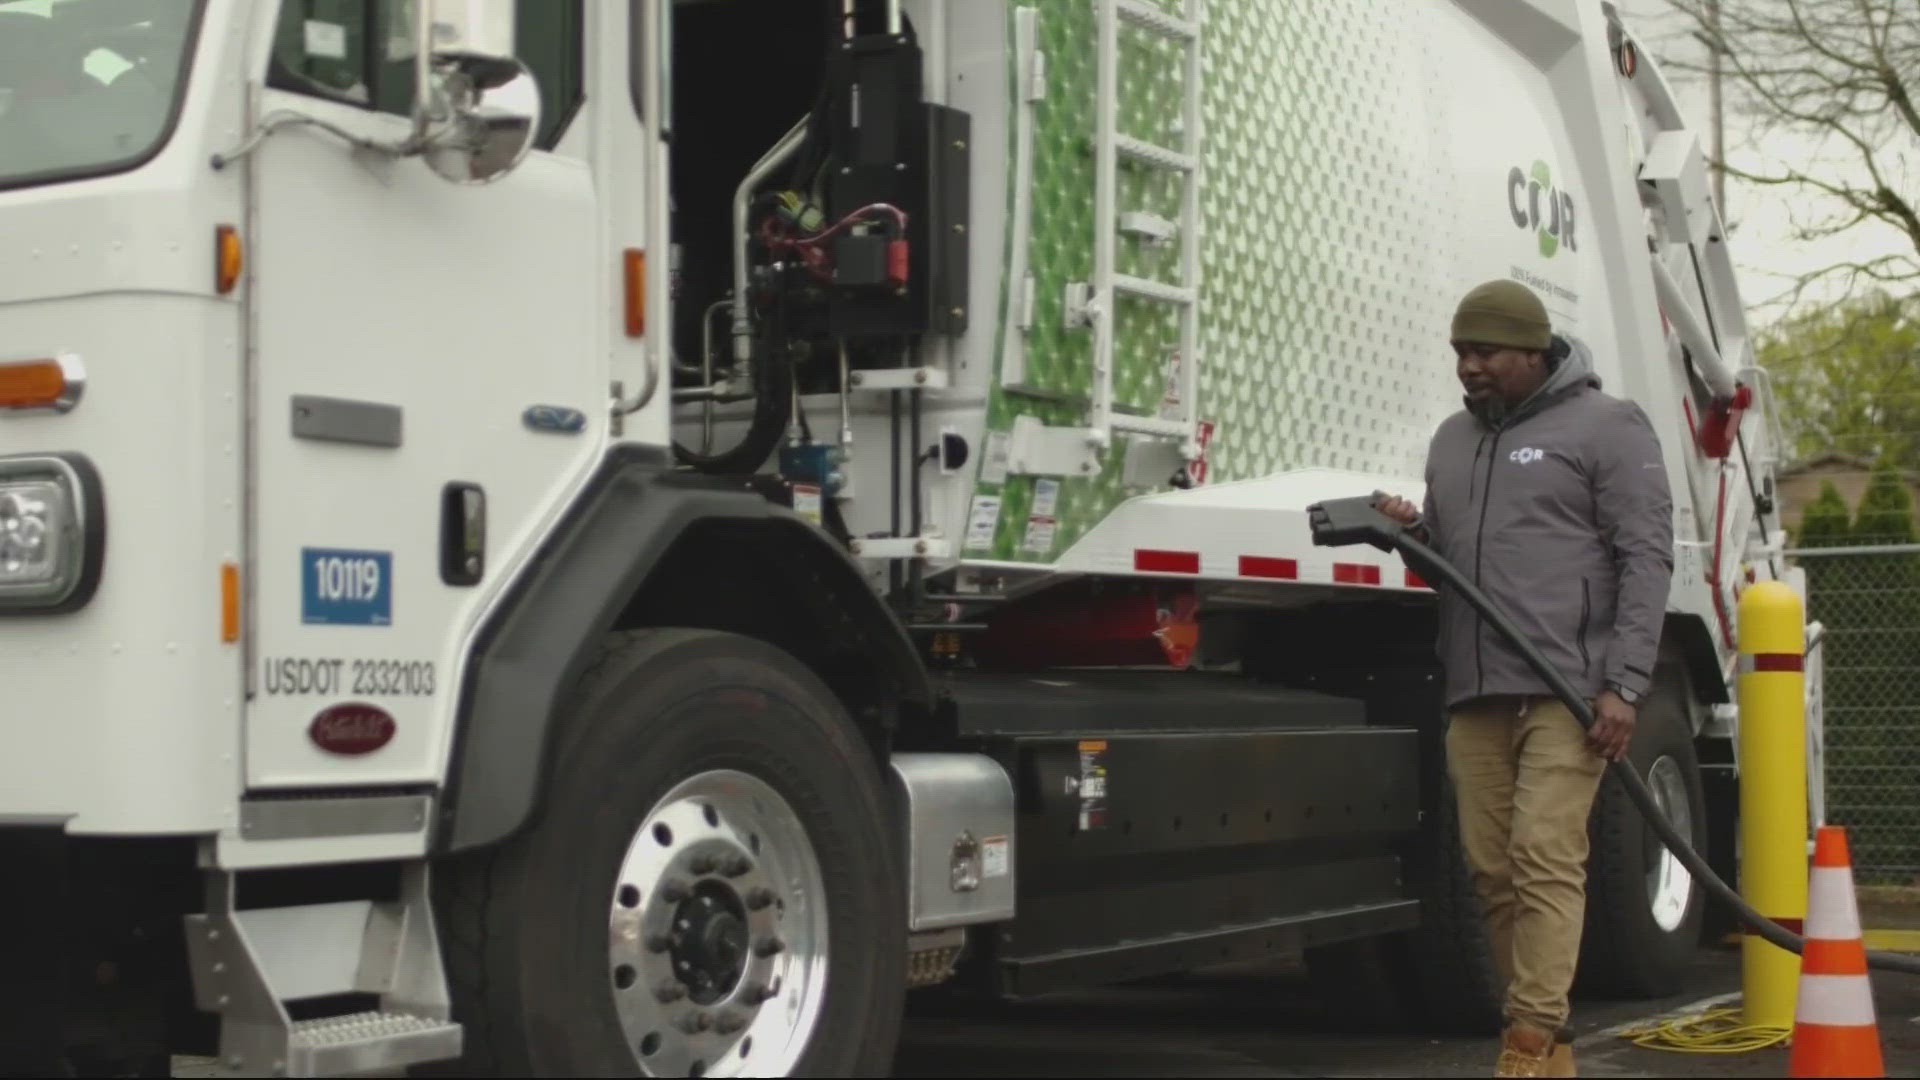 COR Disposal & Recycling is using their all-electric garbage truck to keep food waste out of landfills, and that's just the beginning.